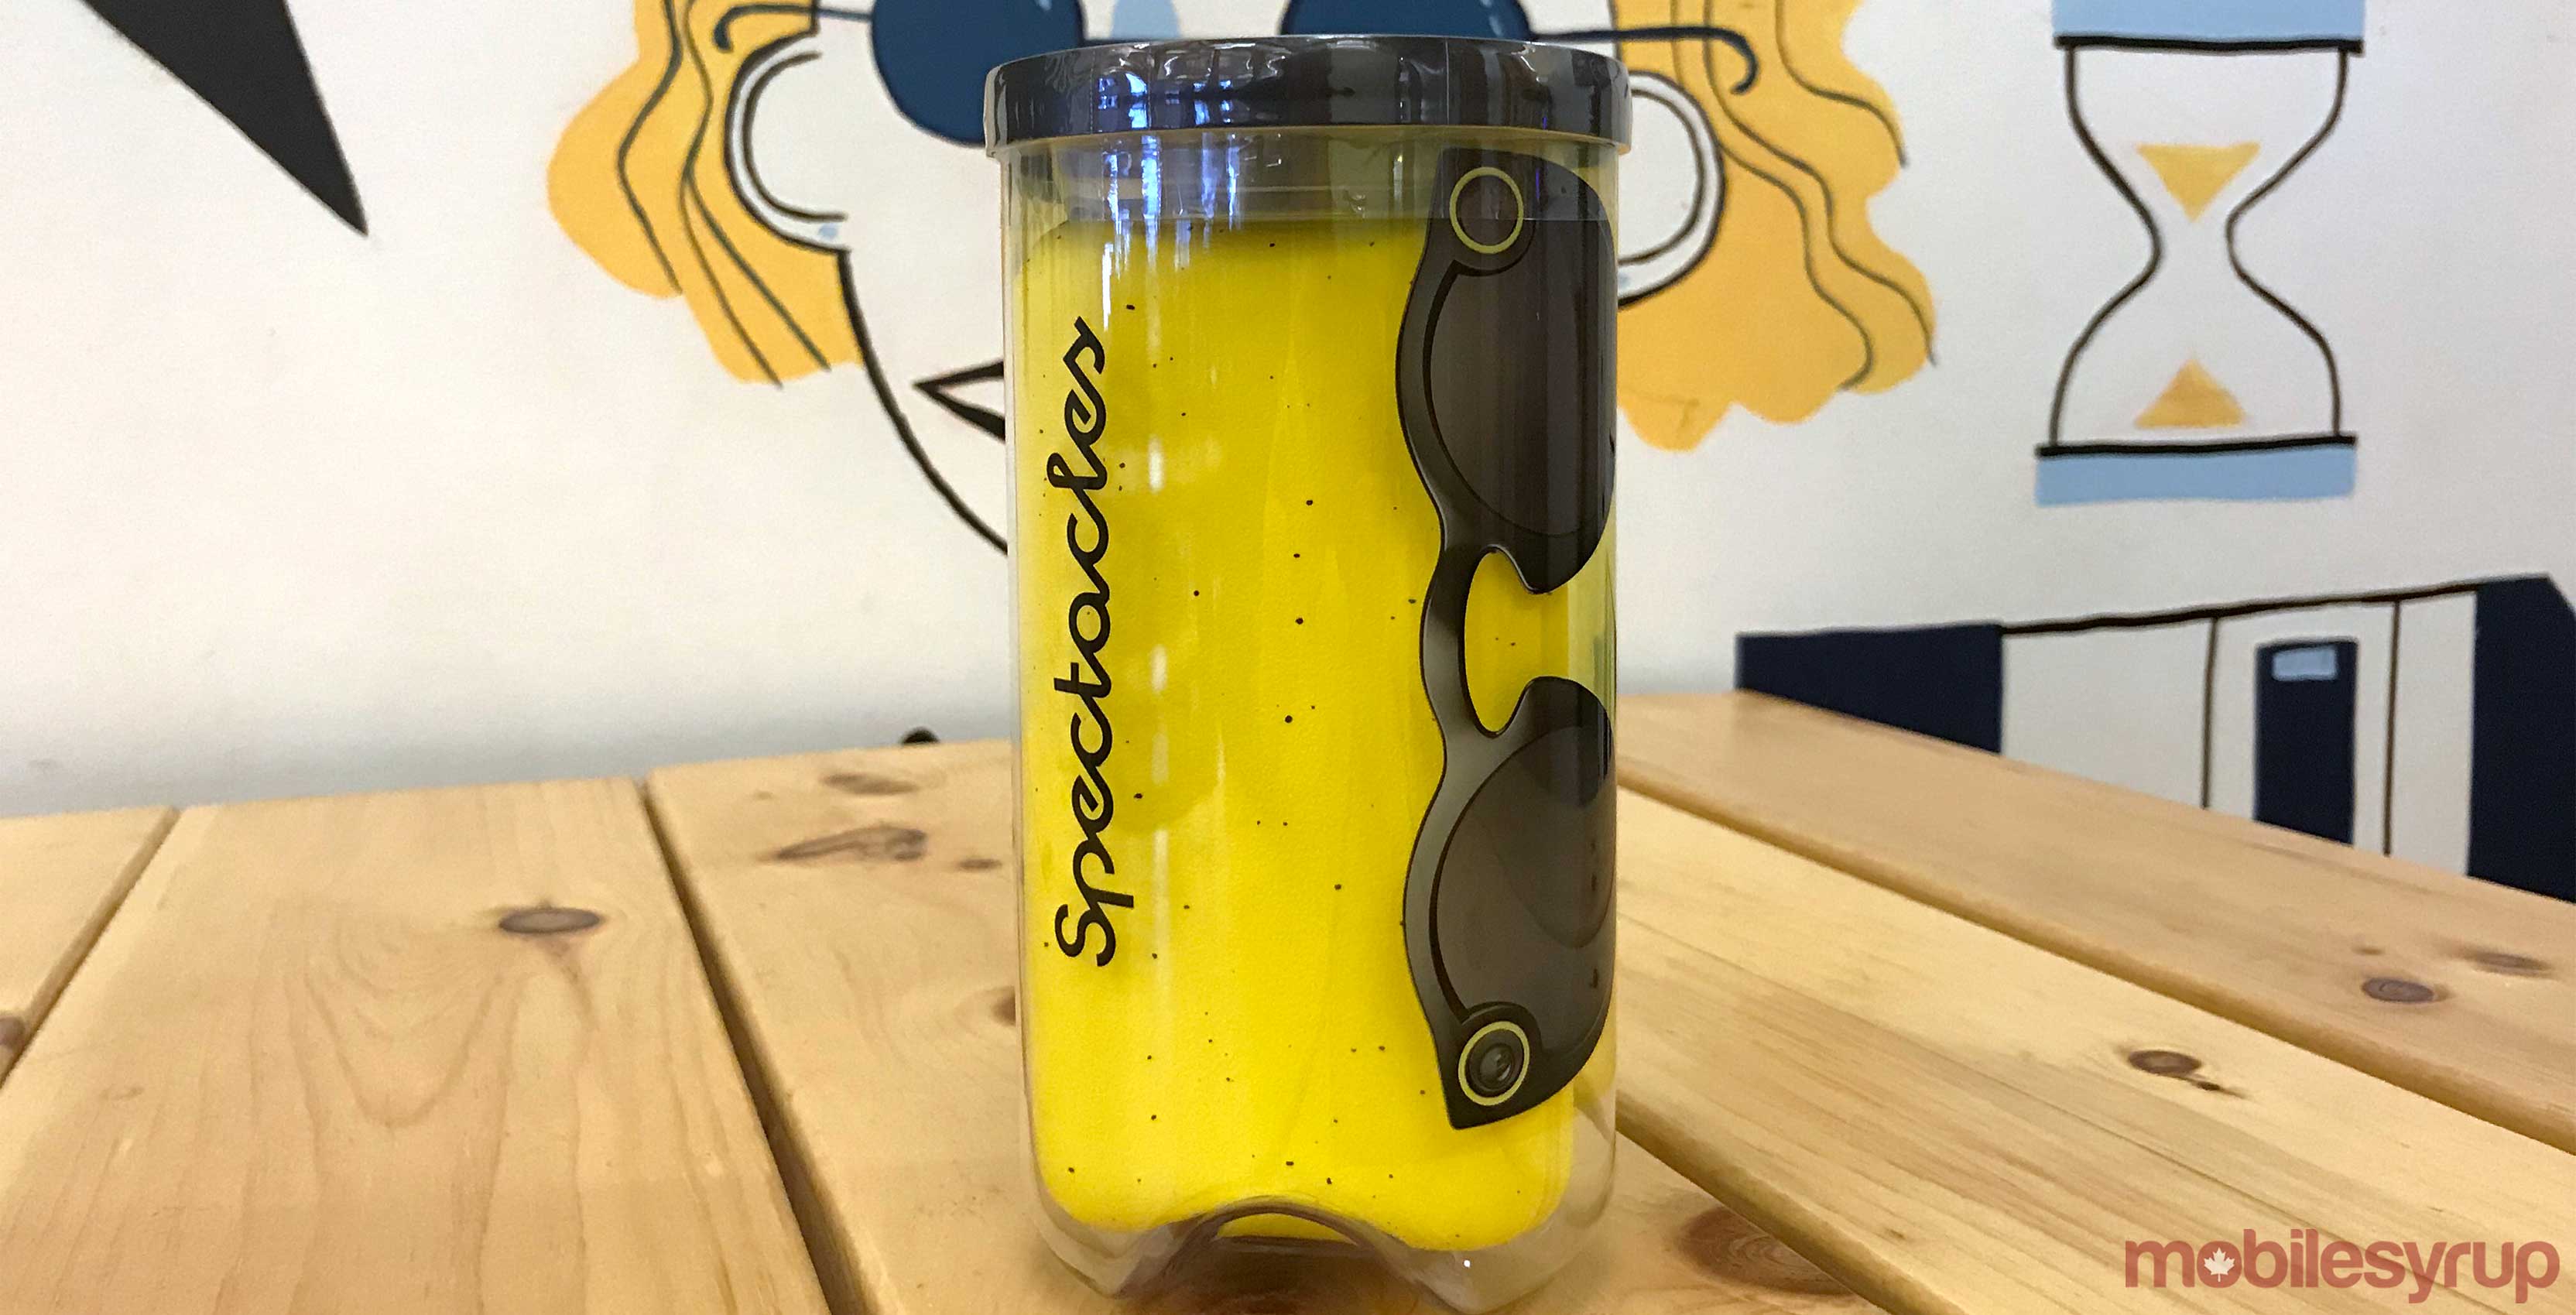 Snap Spectacles